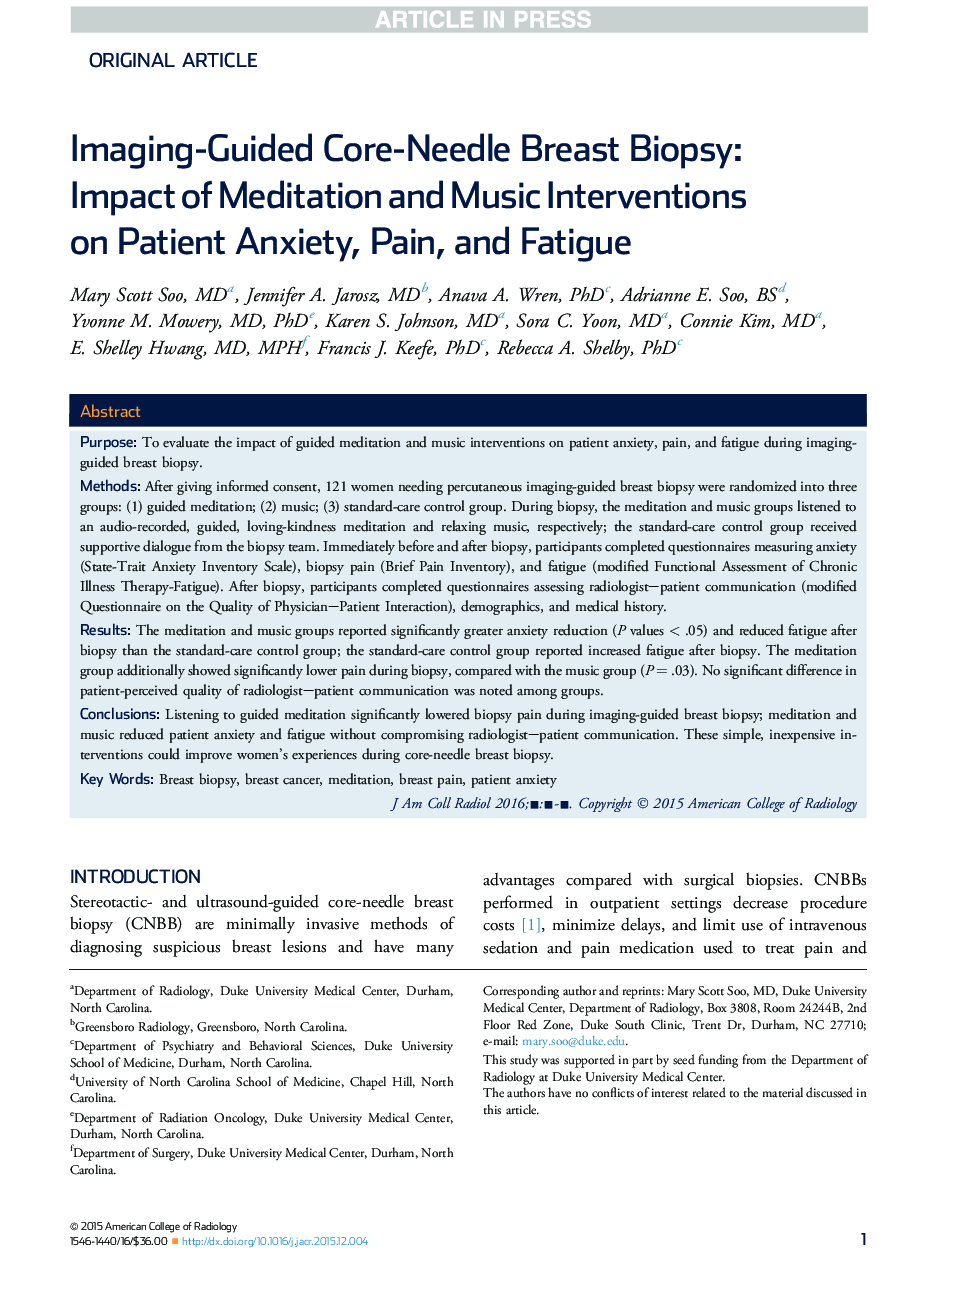 Imaging-Guided Core-Needle Breast Biopsy: Impact of Meditation and Music Interventions on Patient Anxiety, Pain, and Fatigue